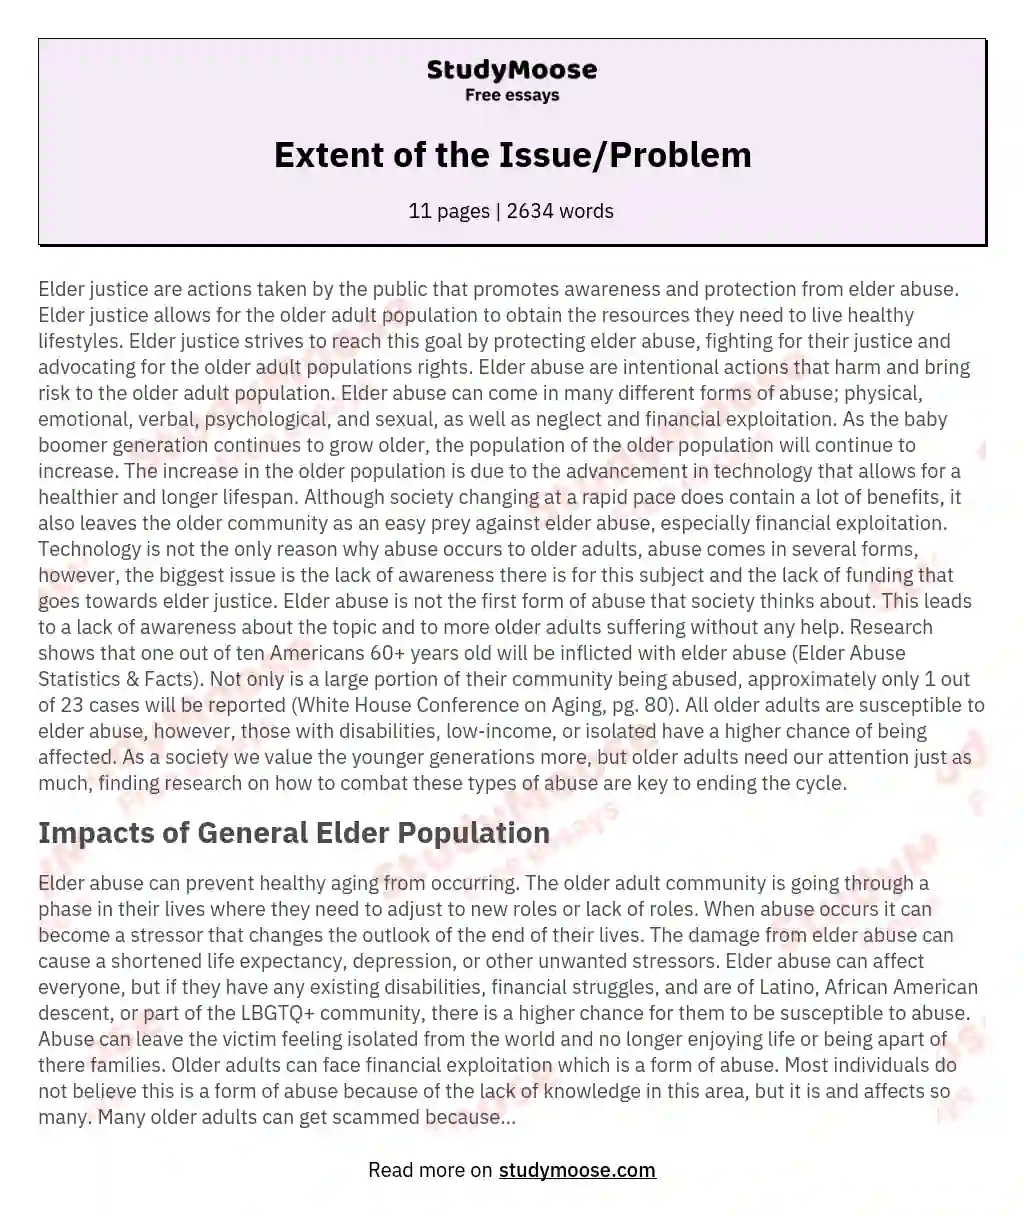 Extent of the Issue/Problem essay